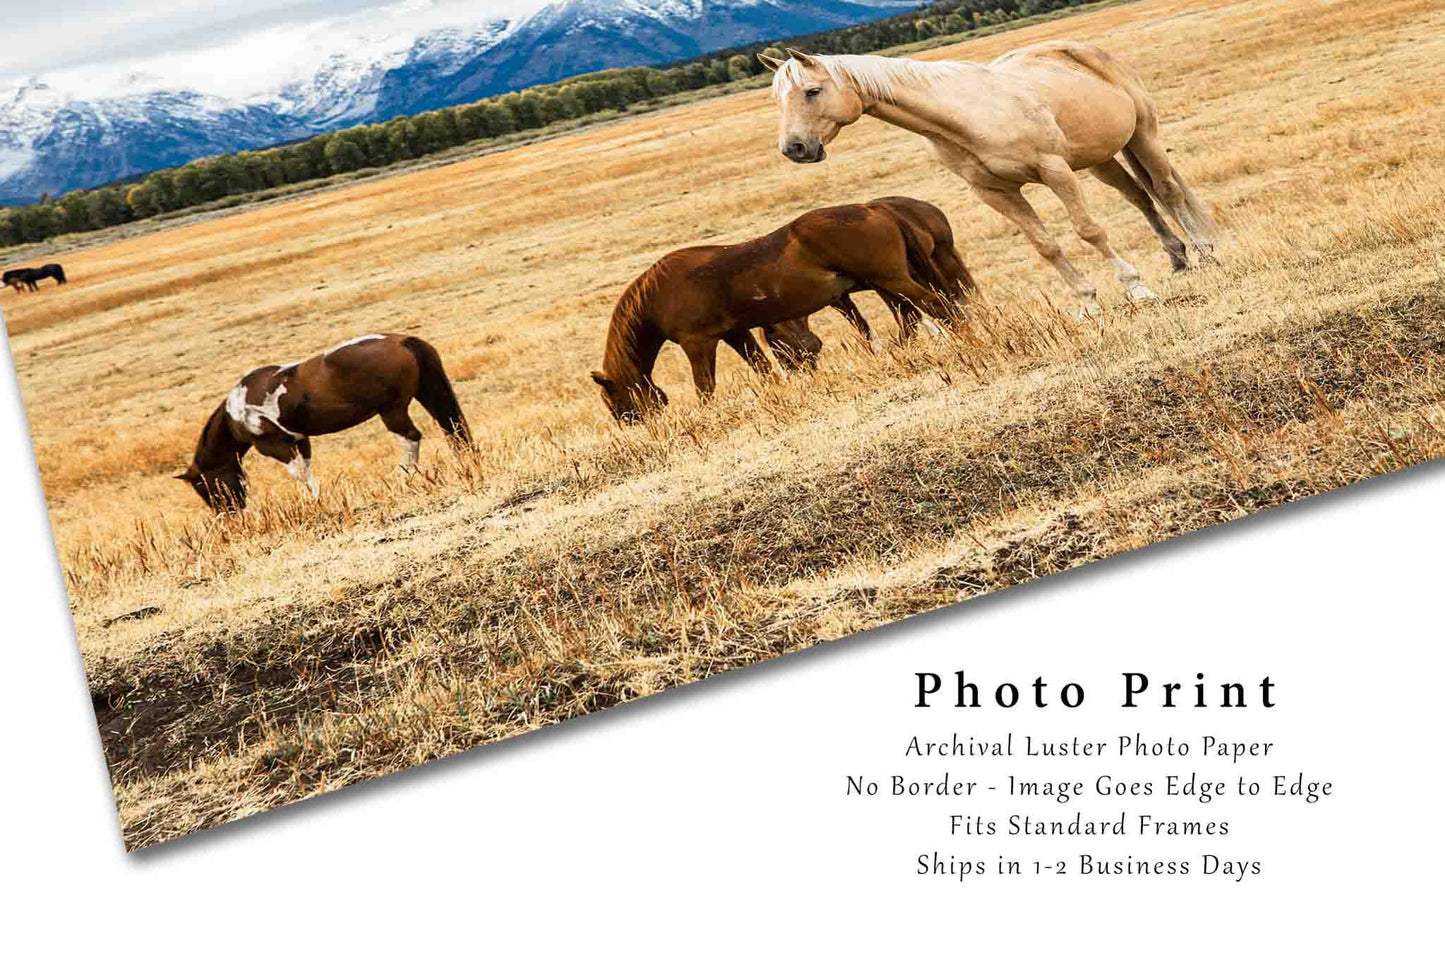 Palomino Horse Photography Print | Equine Picture | Grand Teton Wall Art | Wyoming Photo | Western Decor | Not Framed